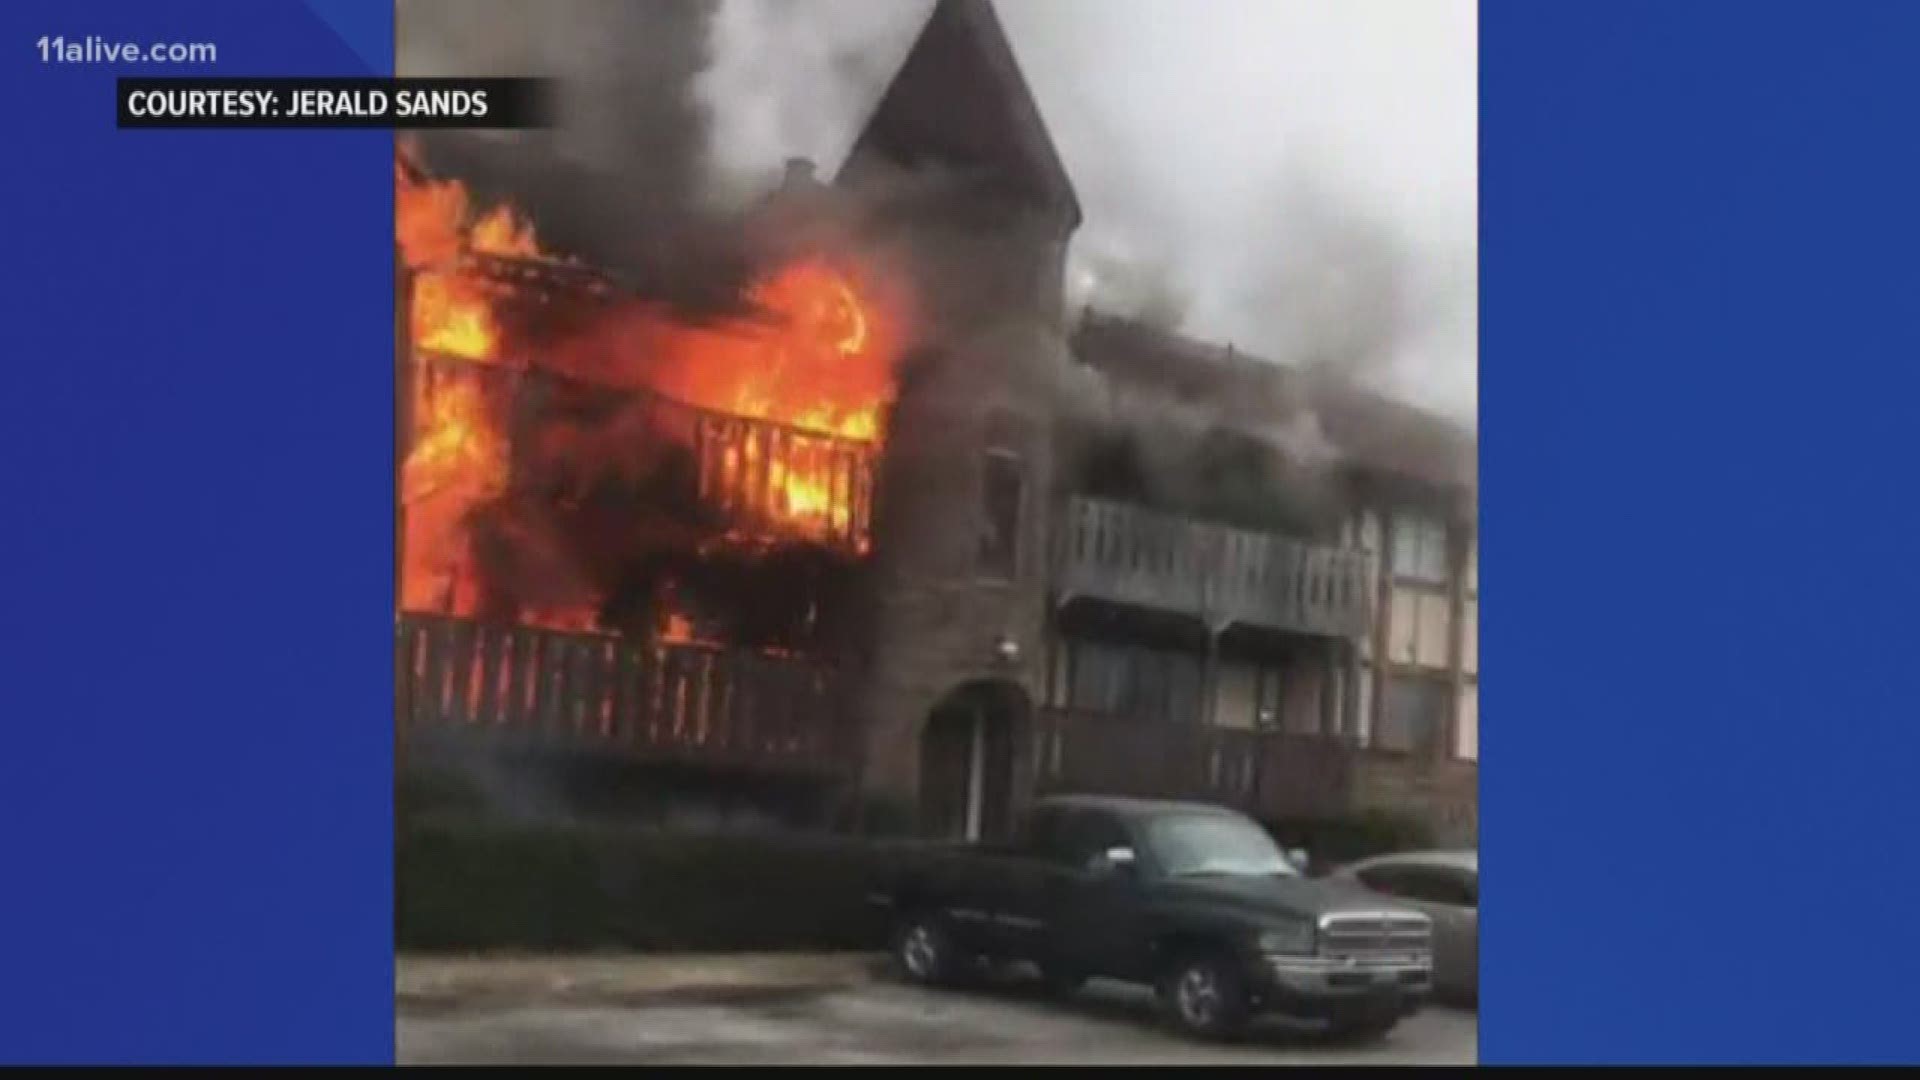 60 residents were displaced.